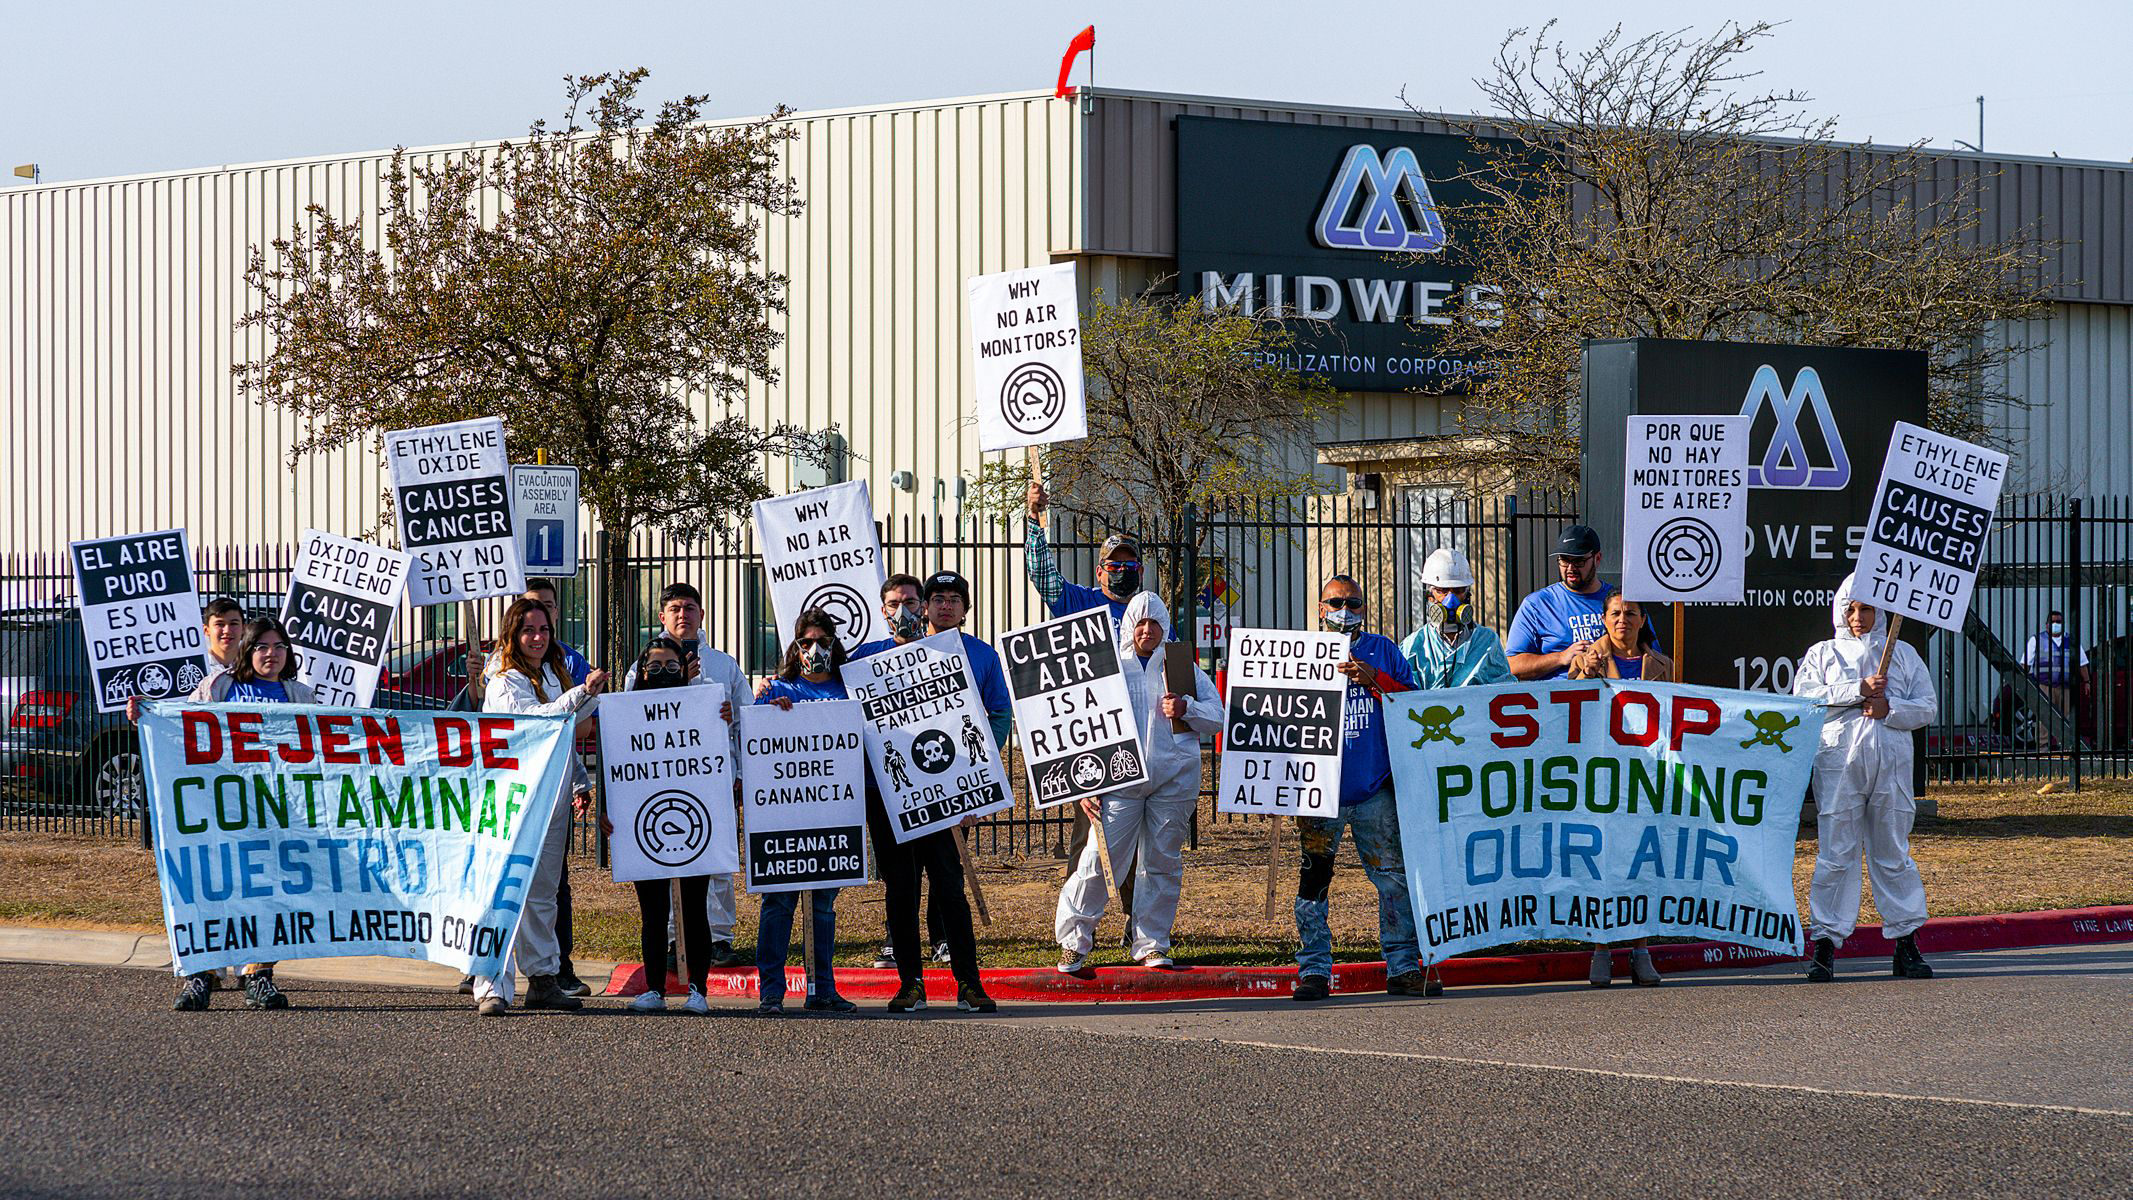 Clean Air Laredo Coalition and Rio Grande International Study Center rally in front of Midwest Sterilizer facility in Laredo, TX. The facility ranks among the most polluting facilities in the nation of ethylene oxide emissions.